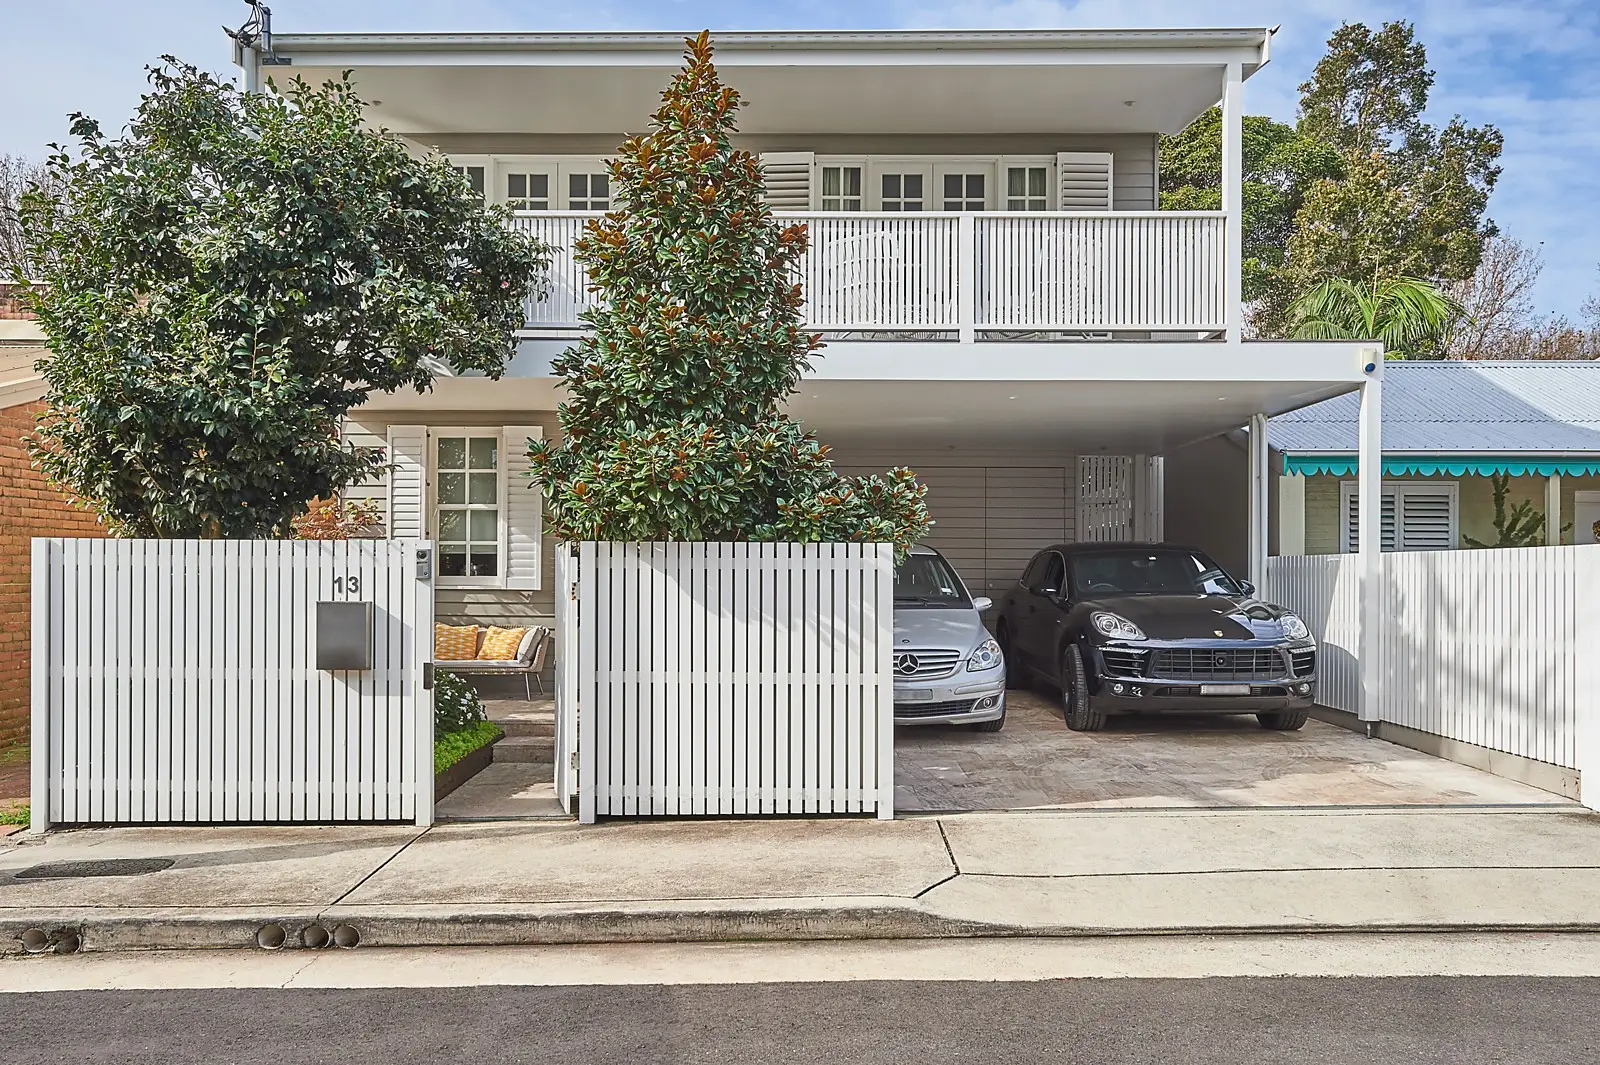 Photo #1: 13 Spicer Street, Woollahra - Sold by Sydney Sotheby's International Realty